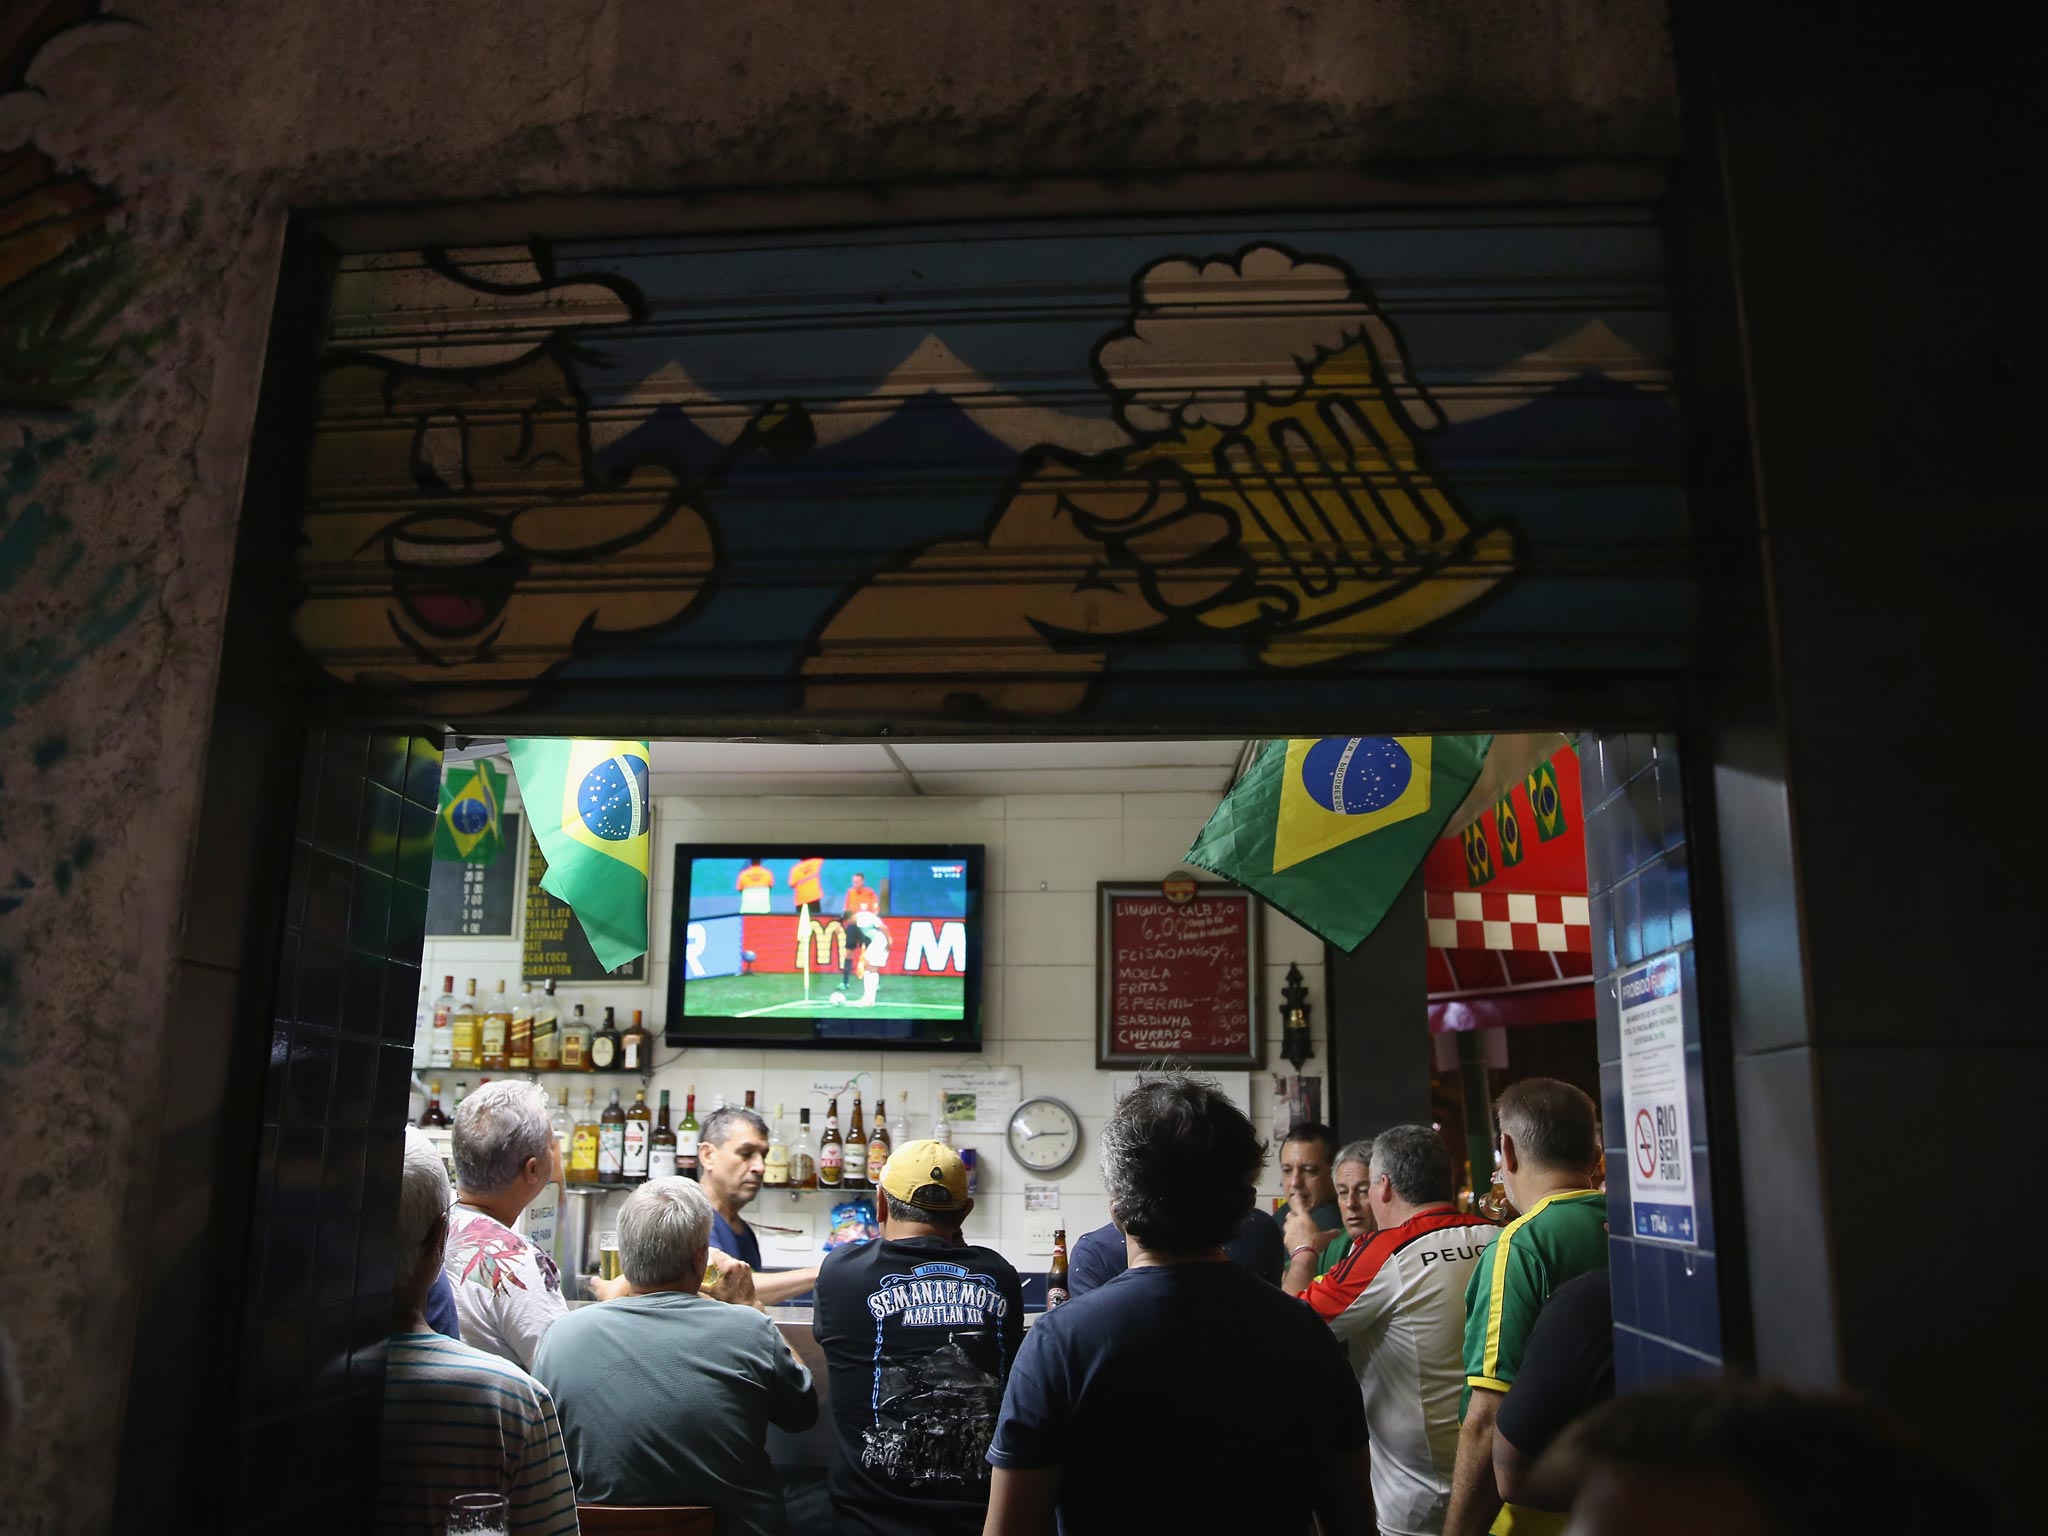 Fans watch and argue over World Cup coverage in a bar in Brazil